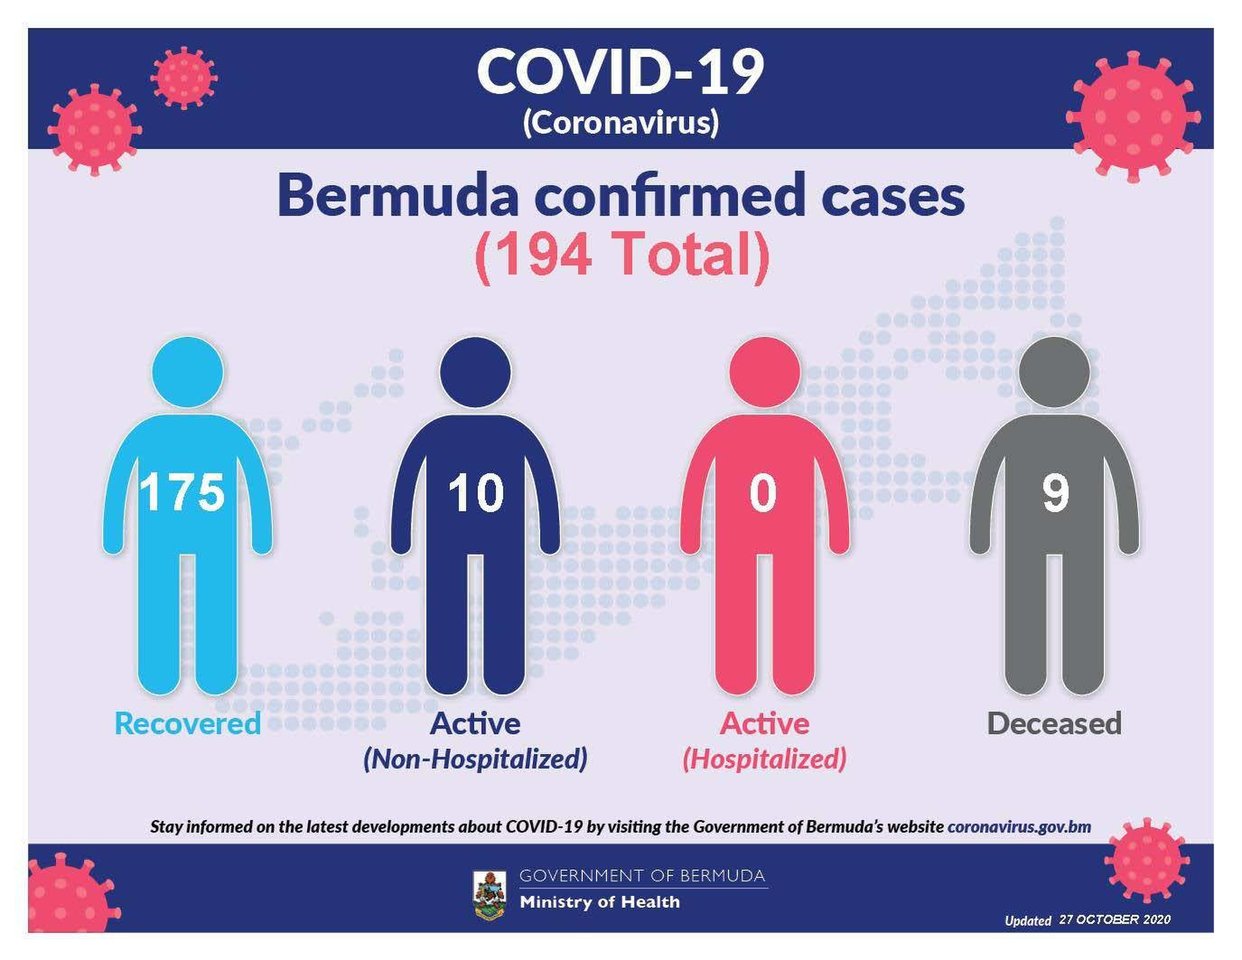 One new COVID-19 case reported in Bermuda, 27 October